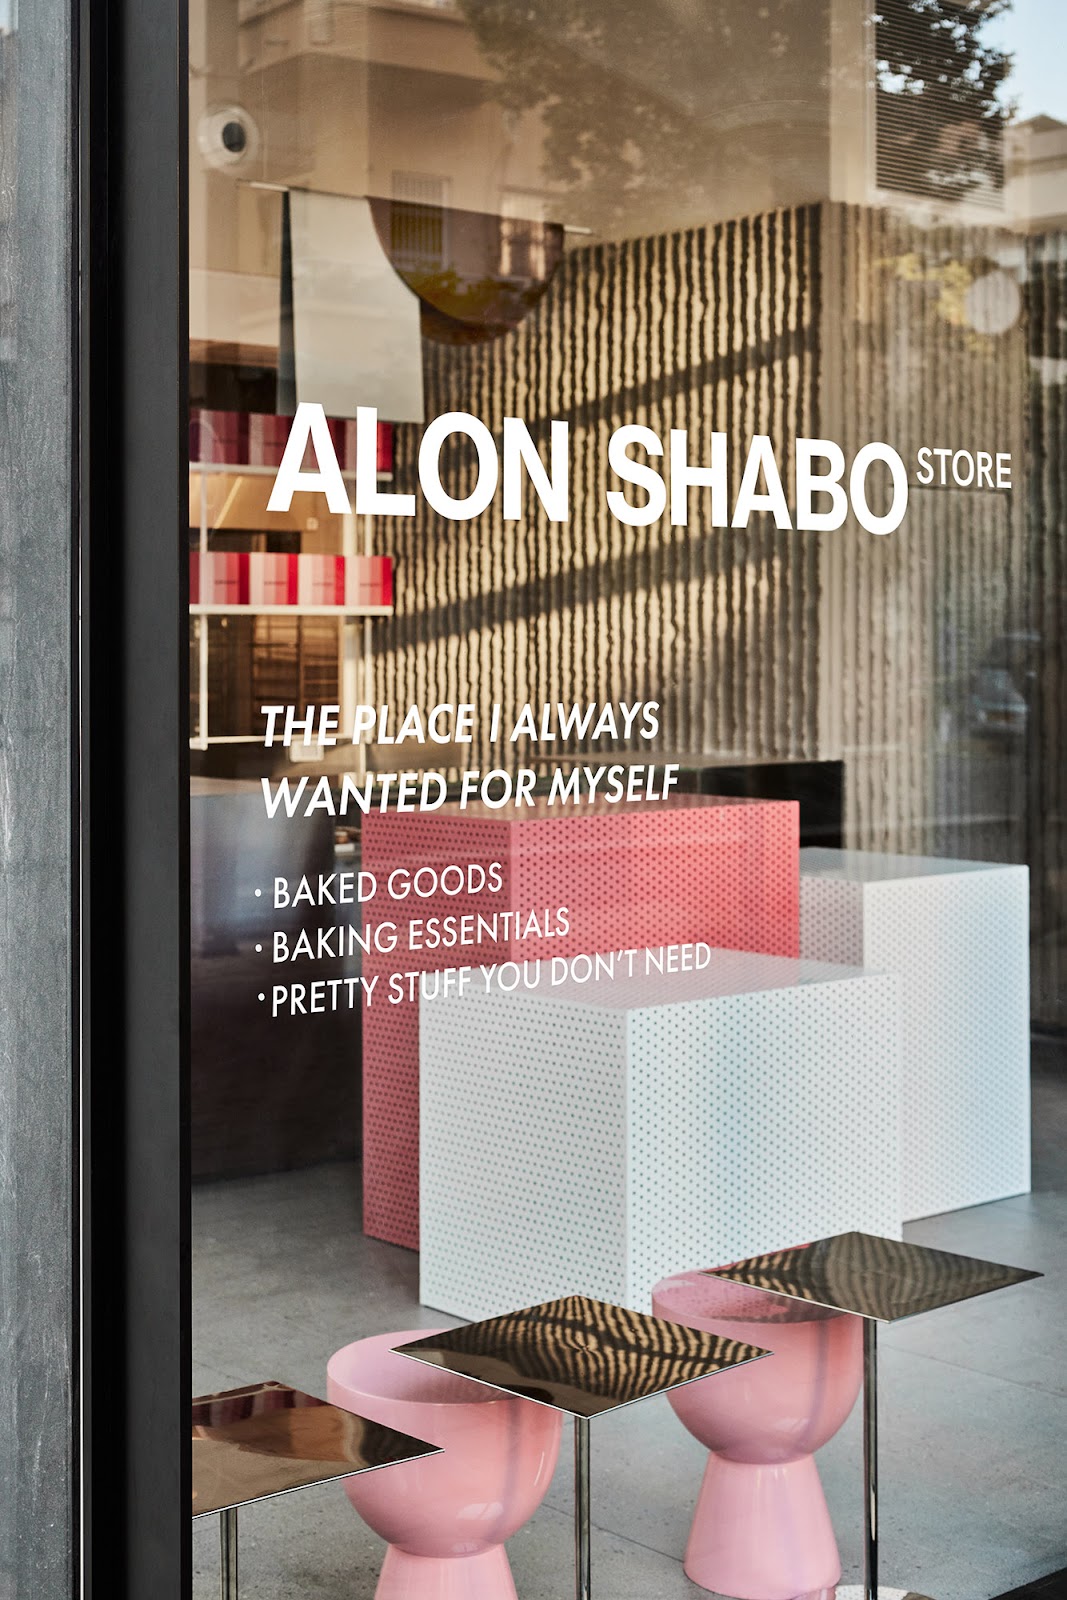 Artifacts for Logo design, packaging design, and visual identity for Alon Shabo Store